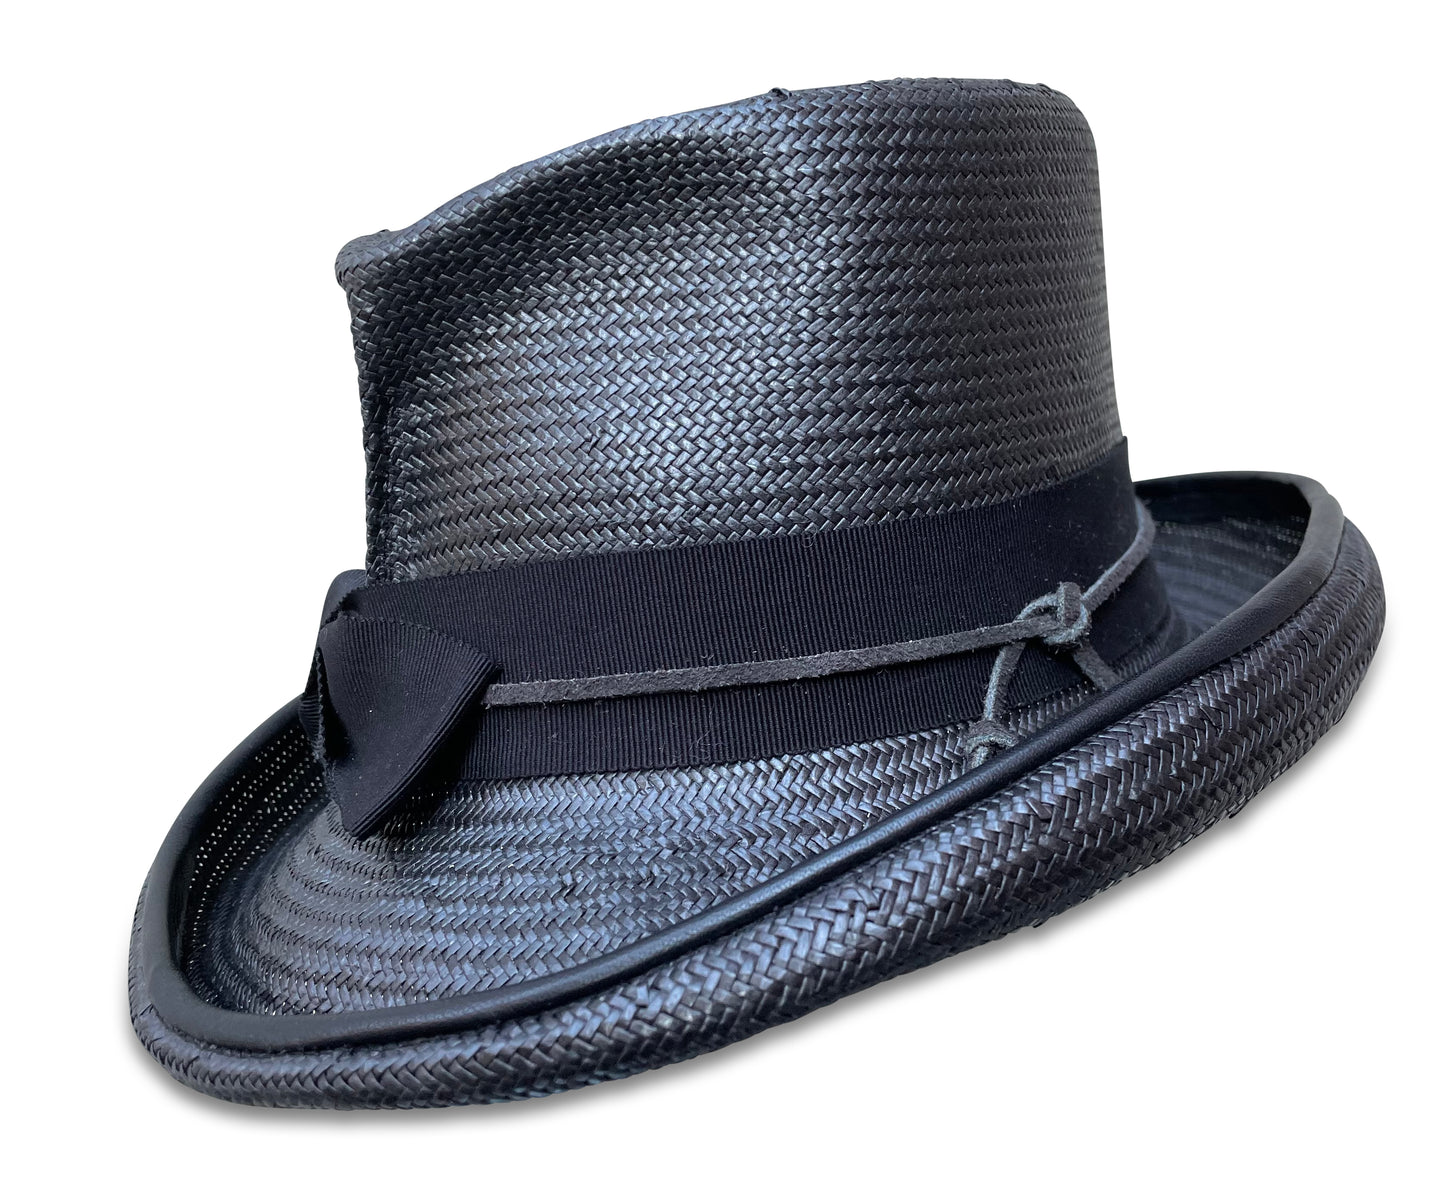 shantung straw top hat made in new york city